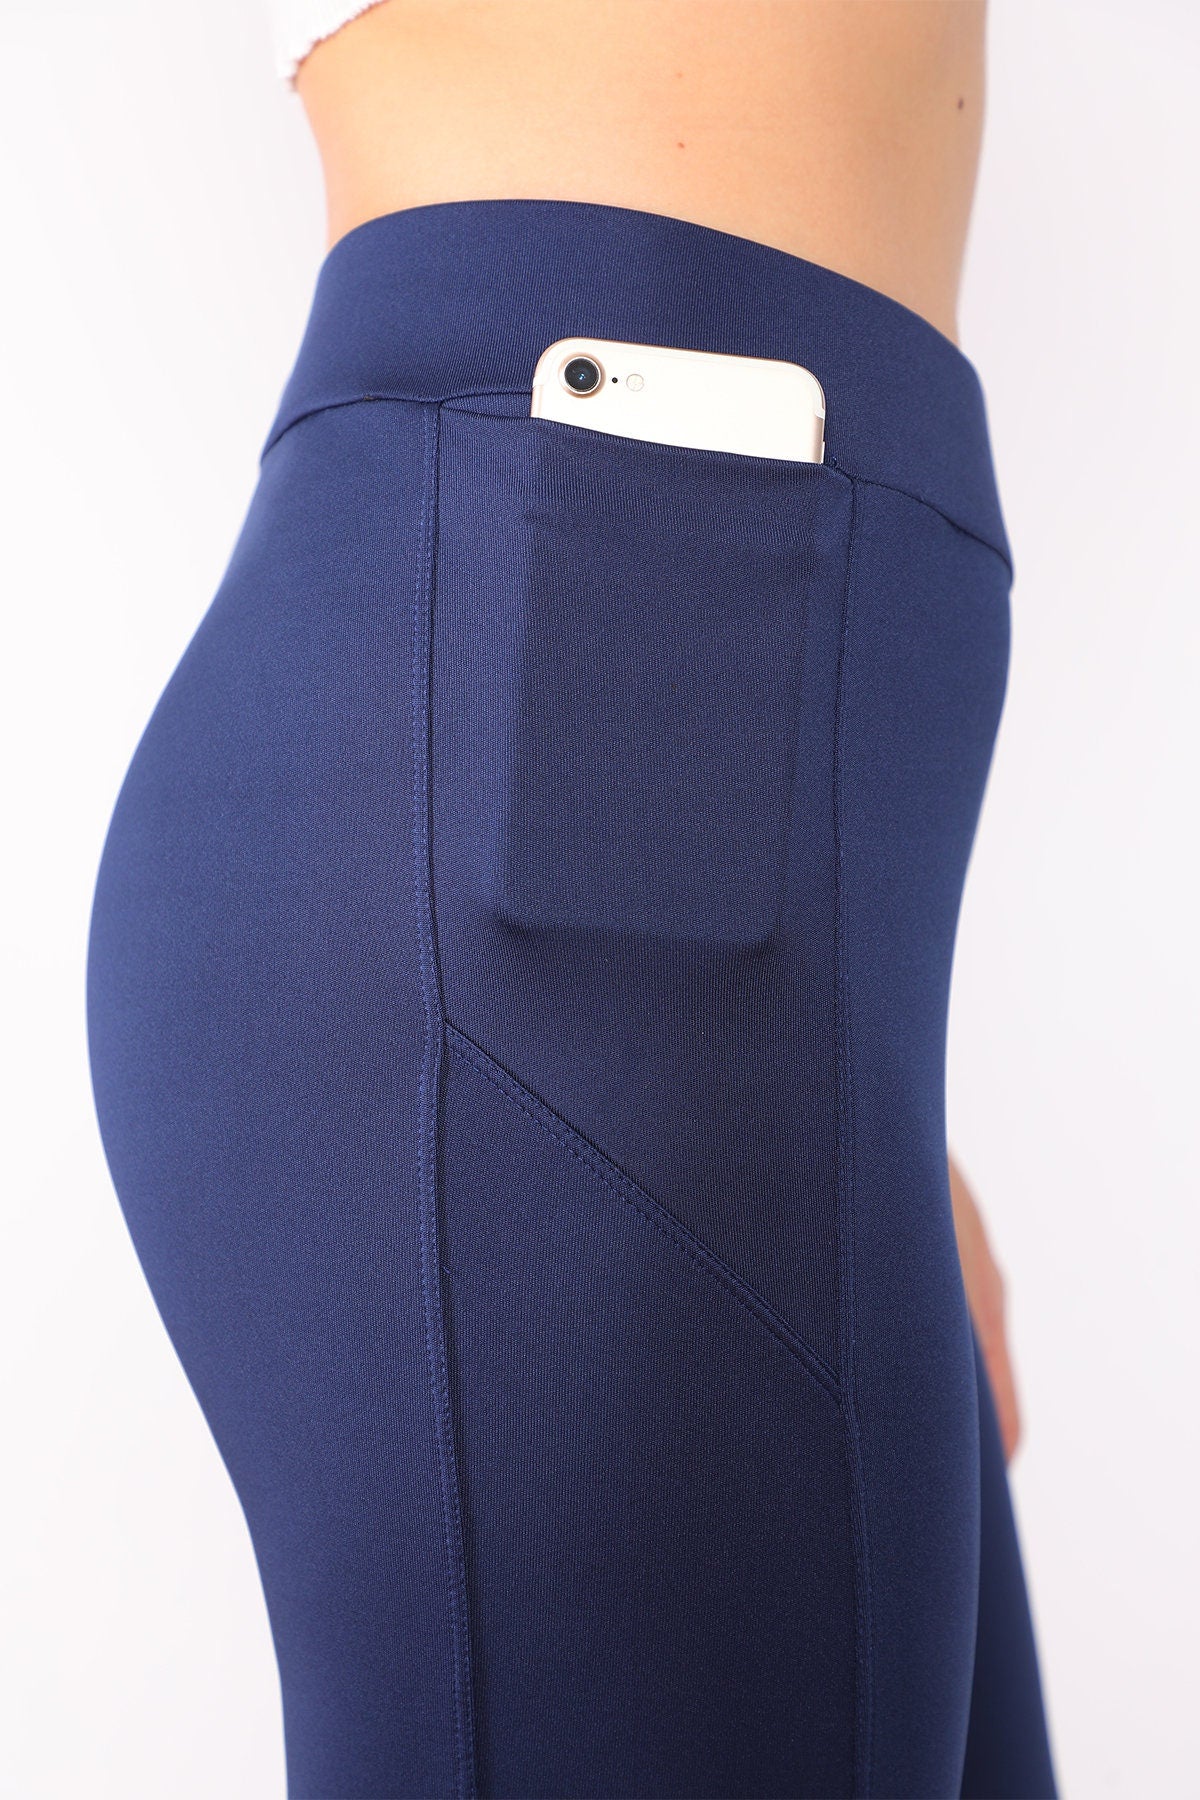 Shorts Low Waist with Pockets Navy Blue